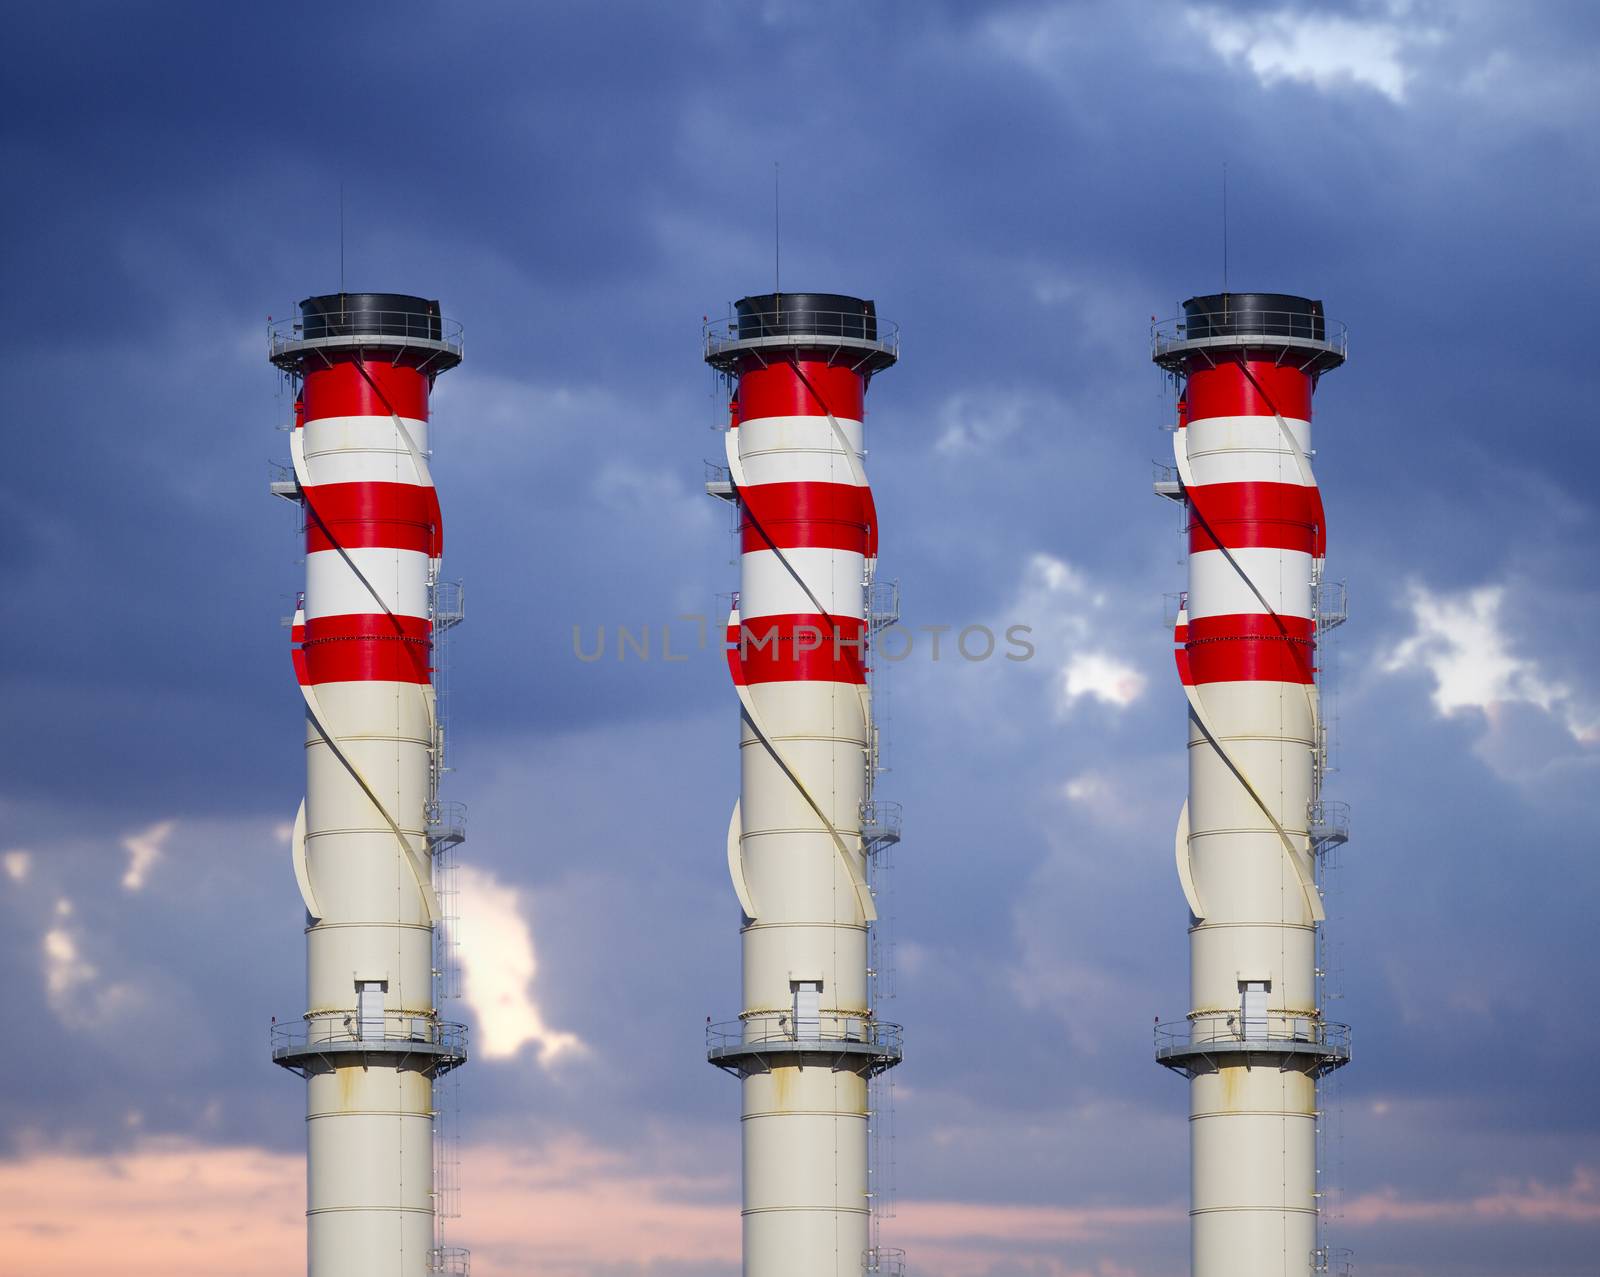 industrial chimneys on cloudy sky at sunset by FernandoCortes